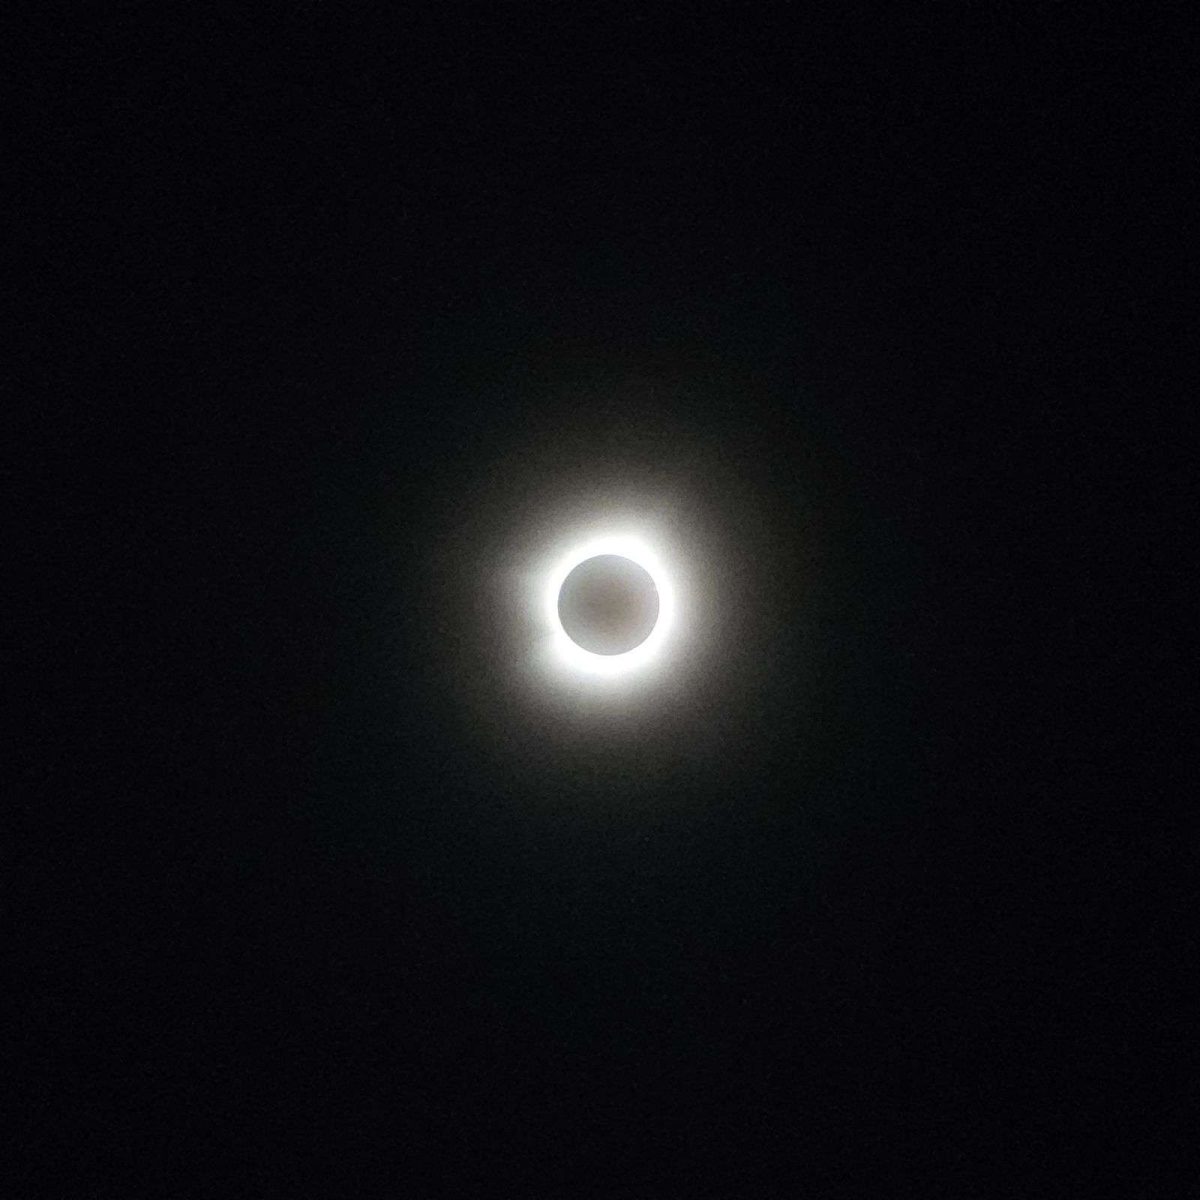 The Solar Eclipse at 1:51 p.m. in Clarkson, AR